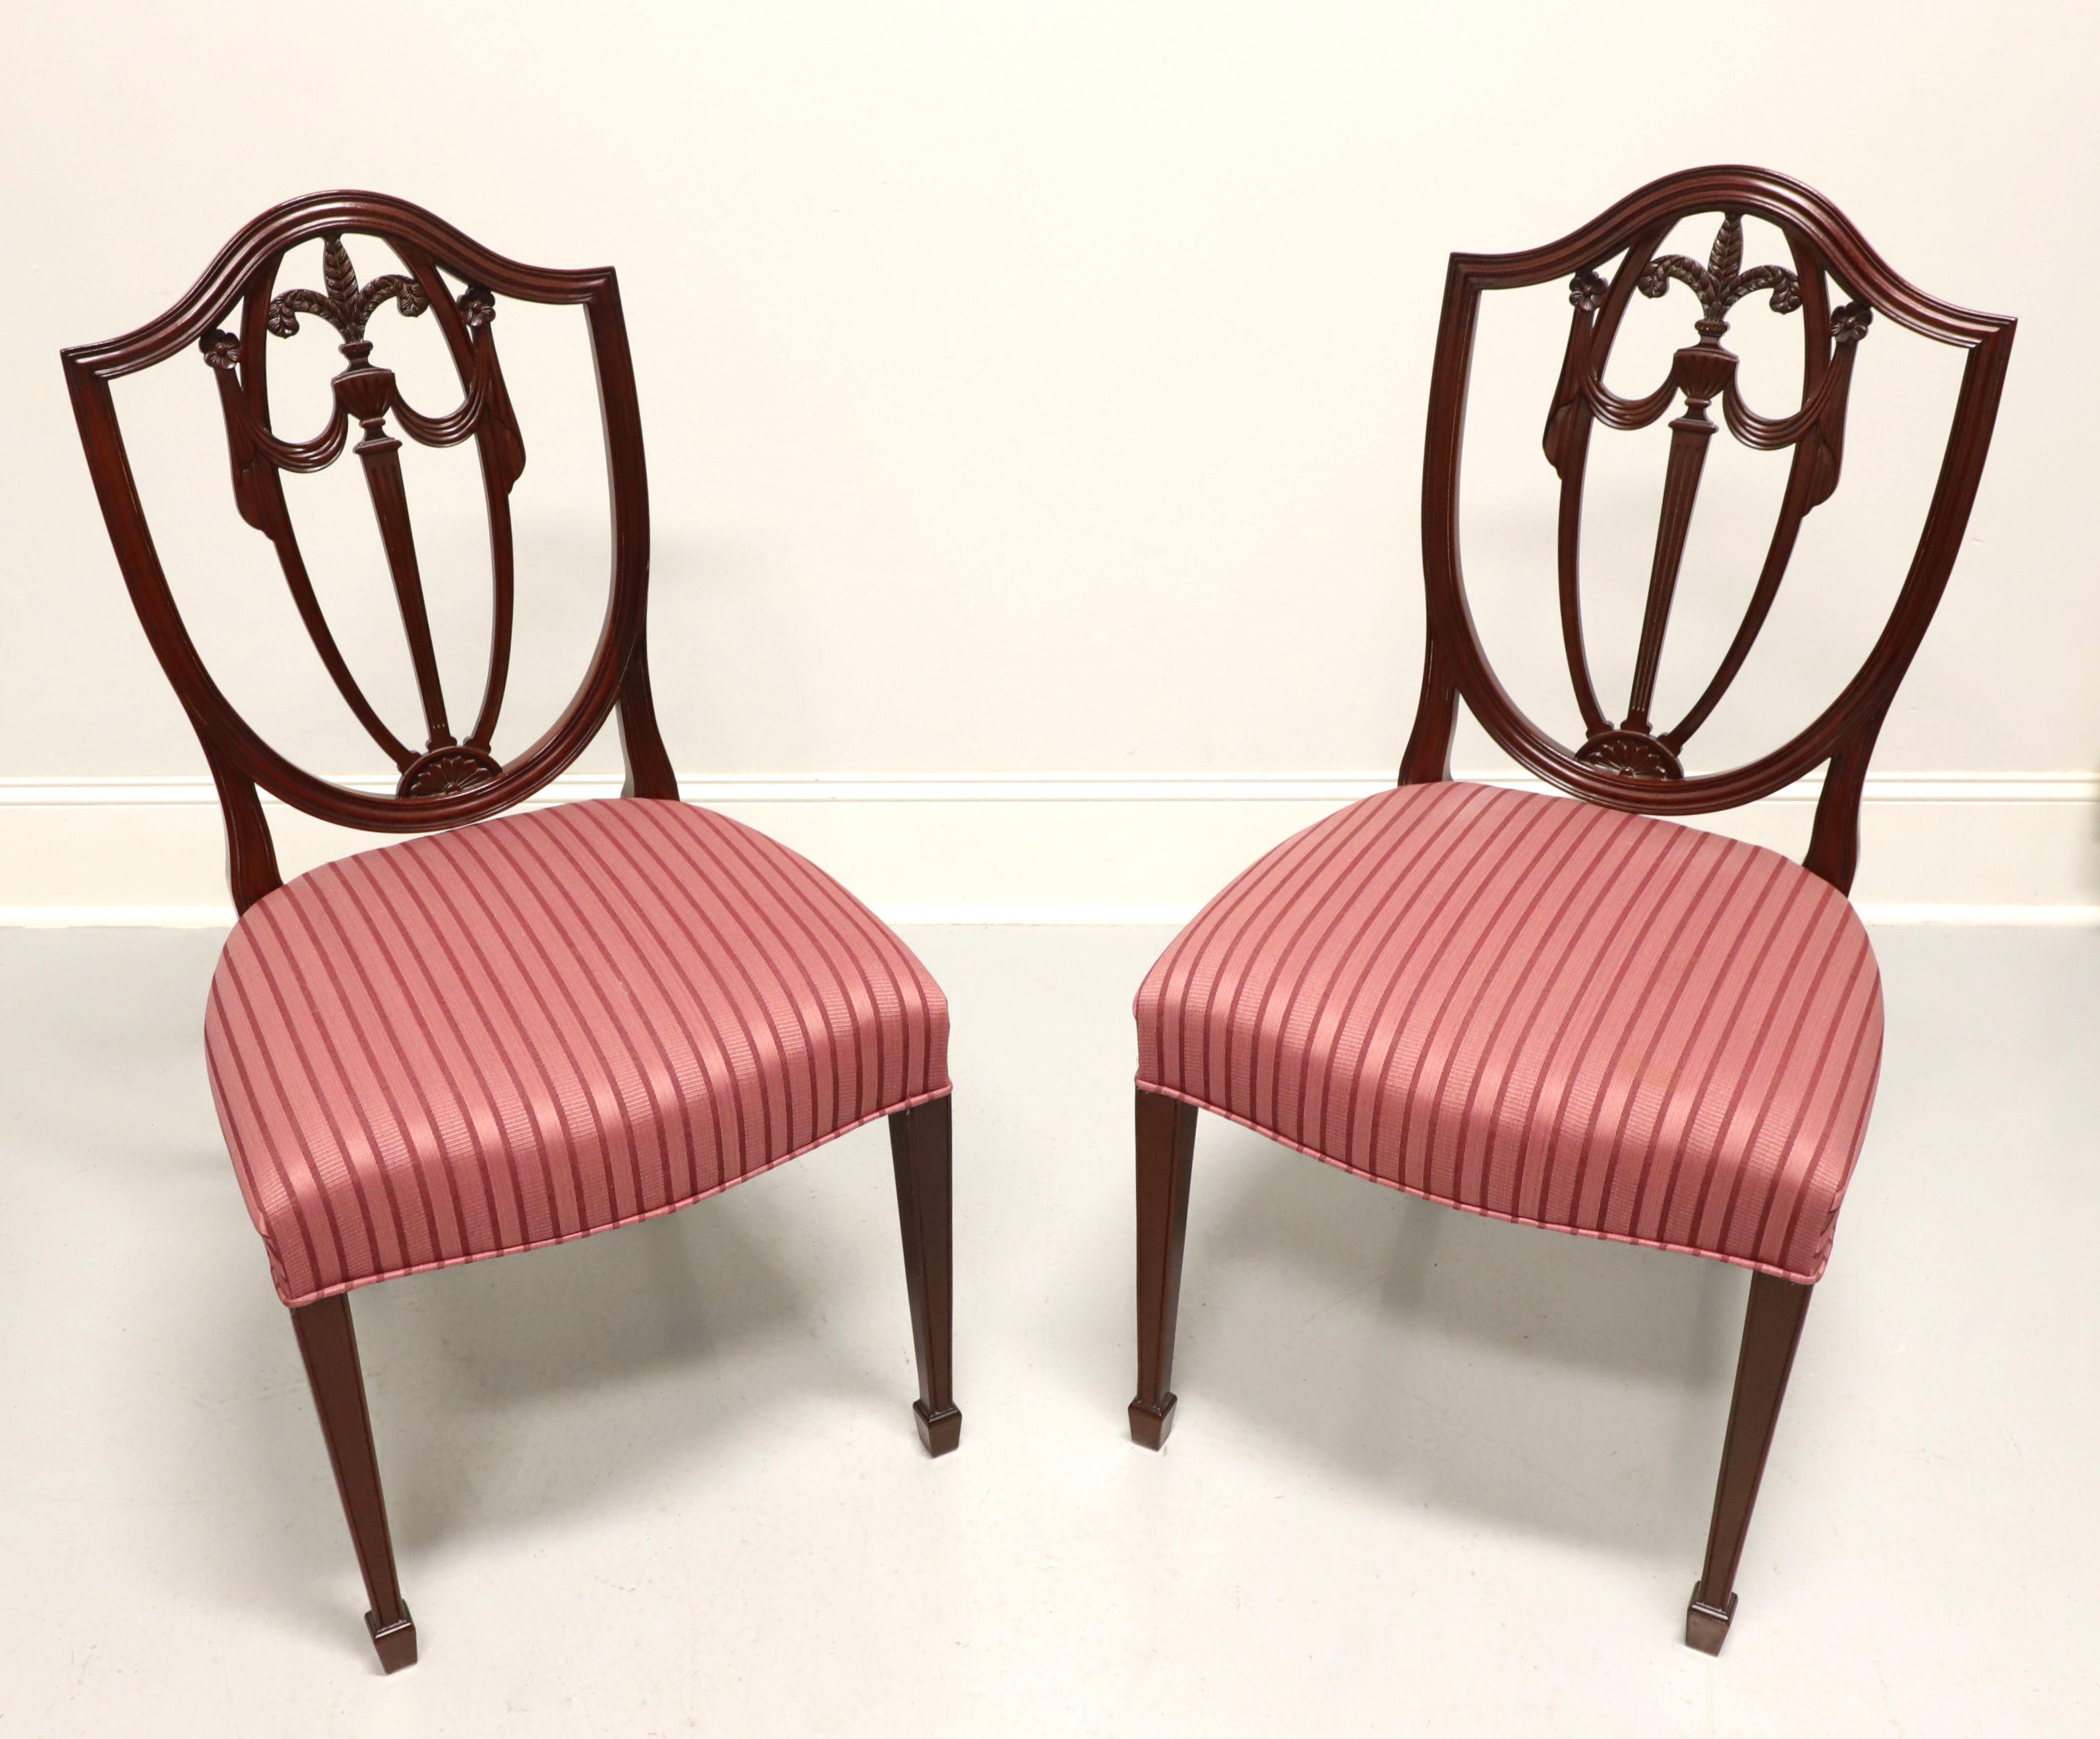 A pair of dining side chairs in the Georgian Hepplewhite style by Kindel Furniture. Inlaid mahogany with carved seatbacks with plumes, upholstered seats, and tapered legs with spade feet. Made in Grand Rapids, Michigan, USA, circa 1994. 

Style: